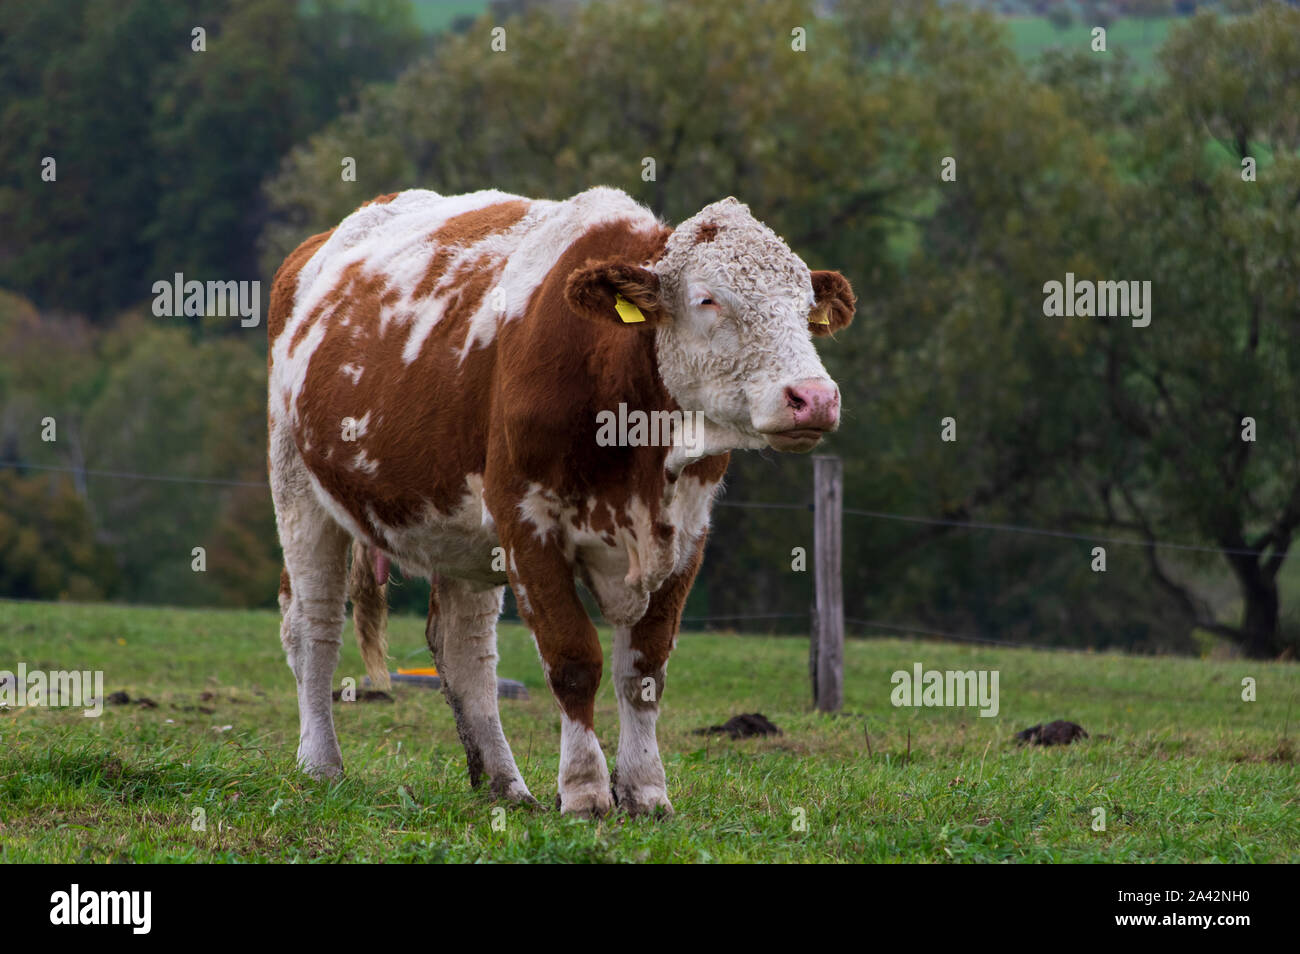 brown and white cow in a field Stock Photo